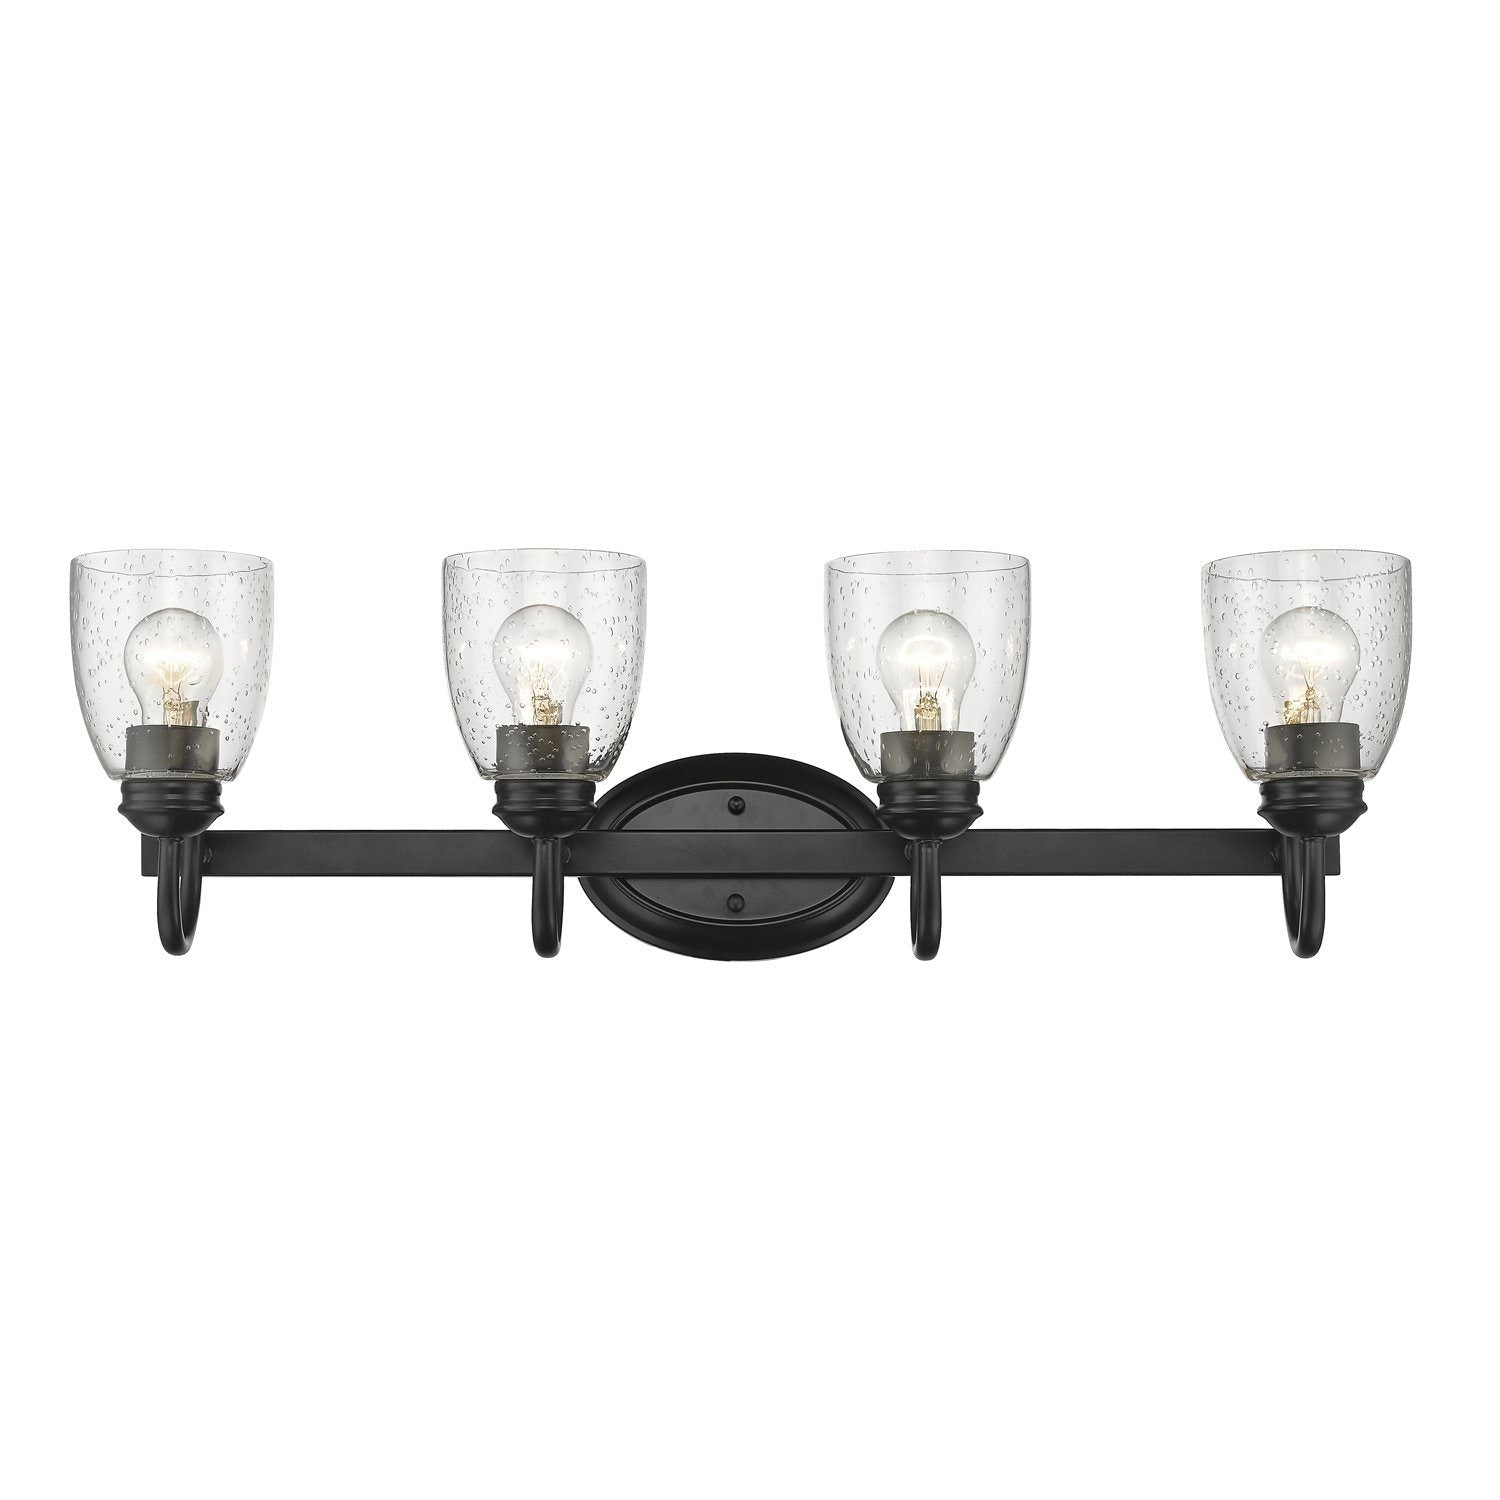 Parrish 4 Light Bath Vanity in Black with Seeded Glass Wall Golden Lighting 